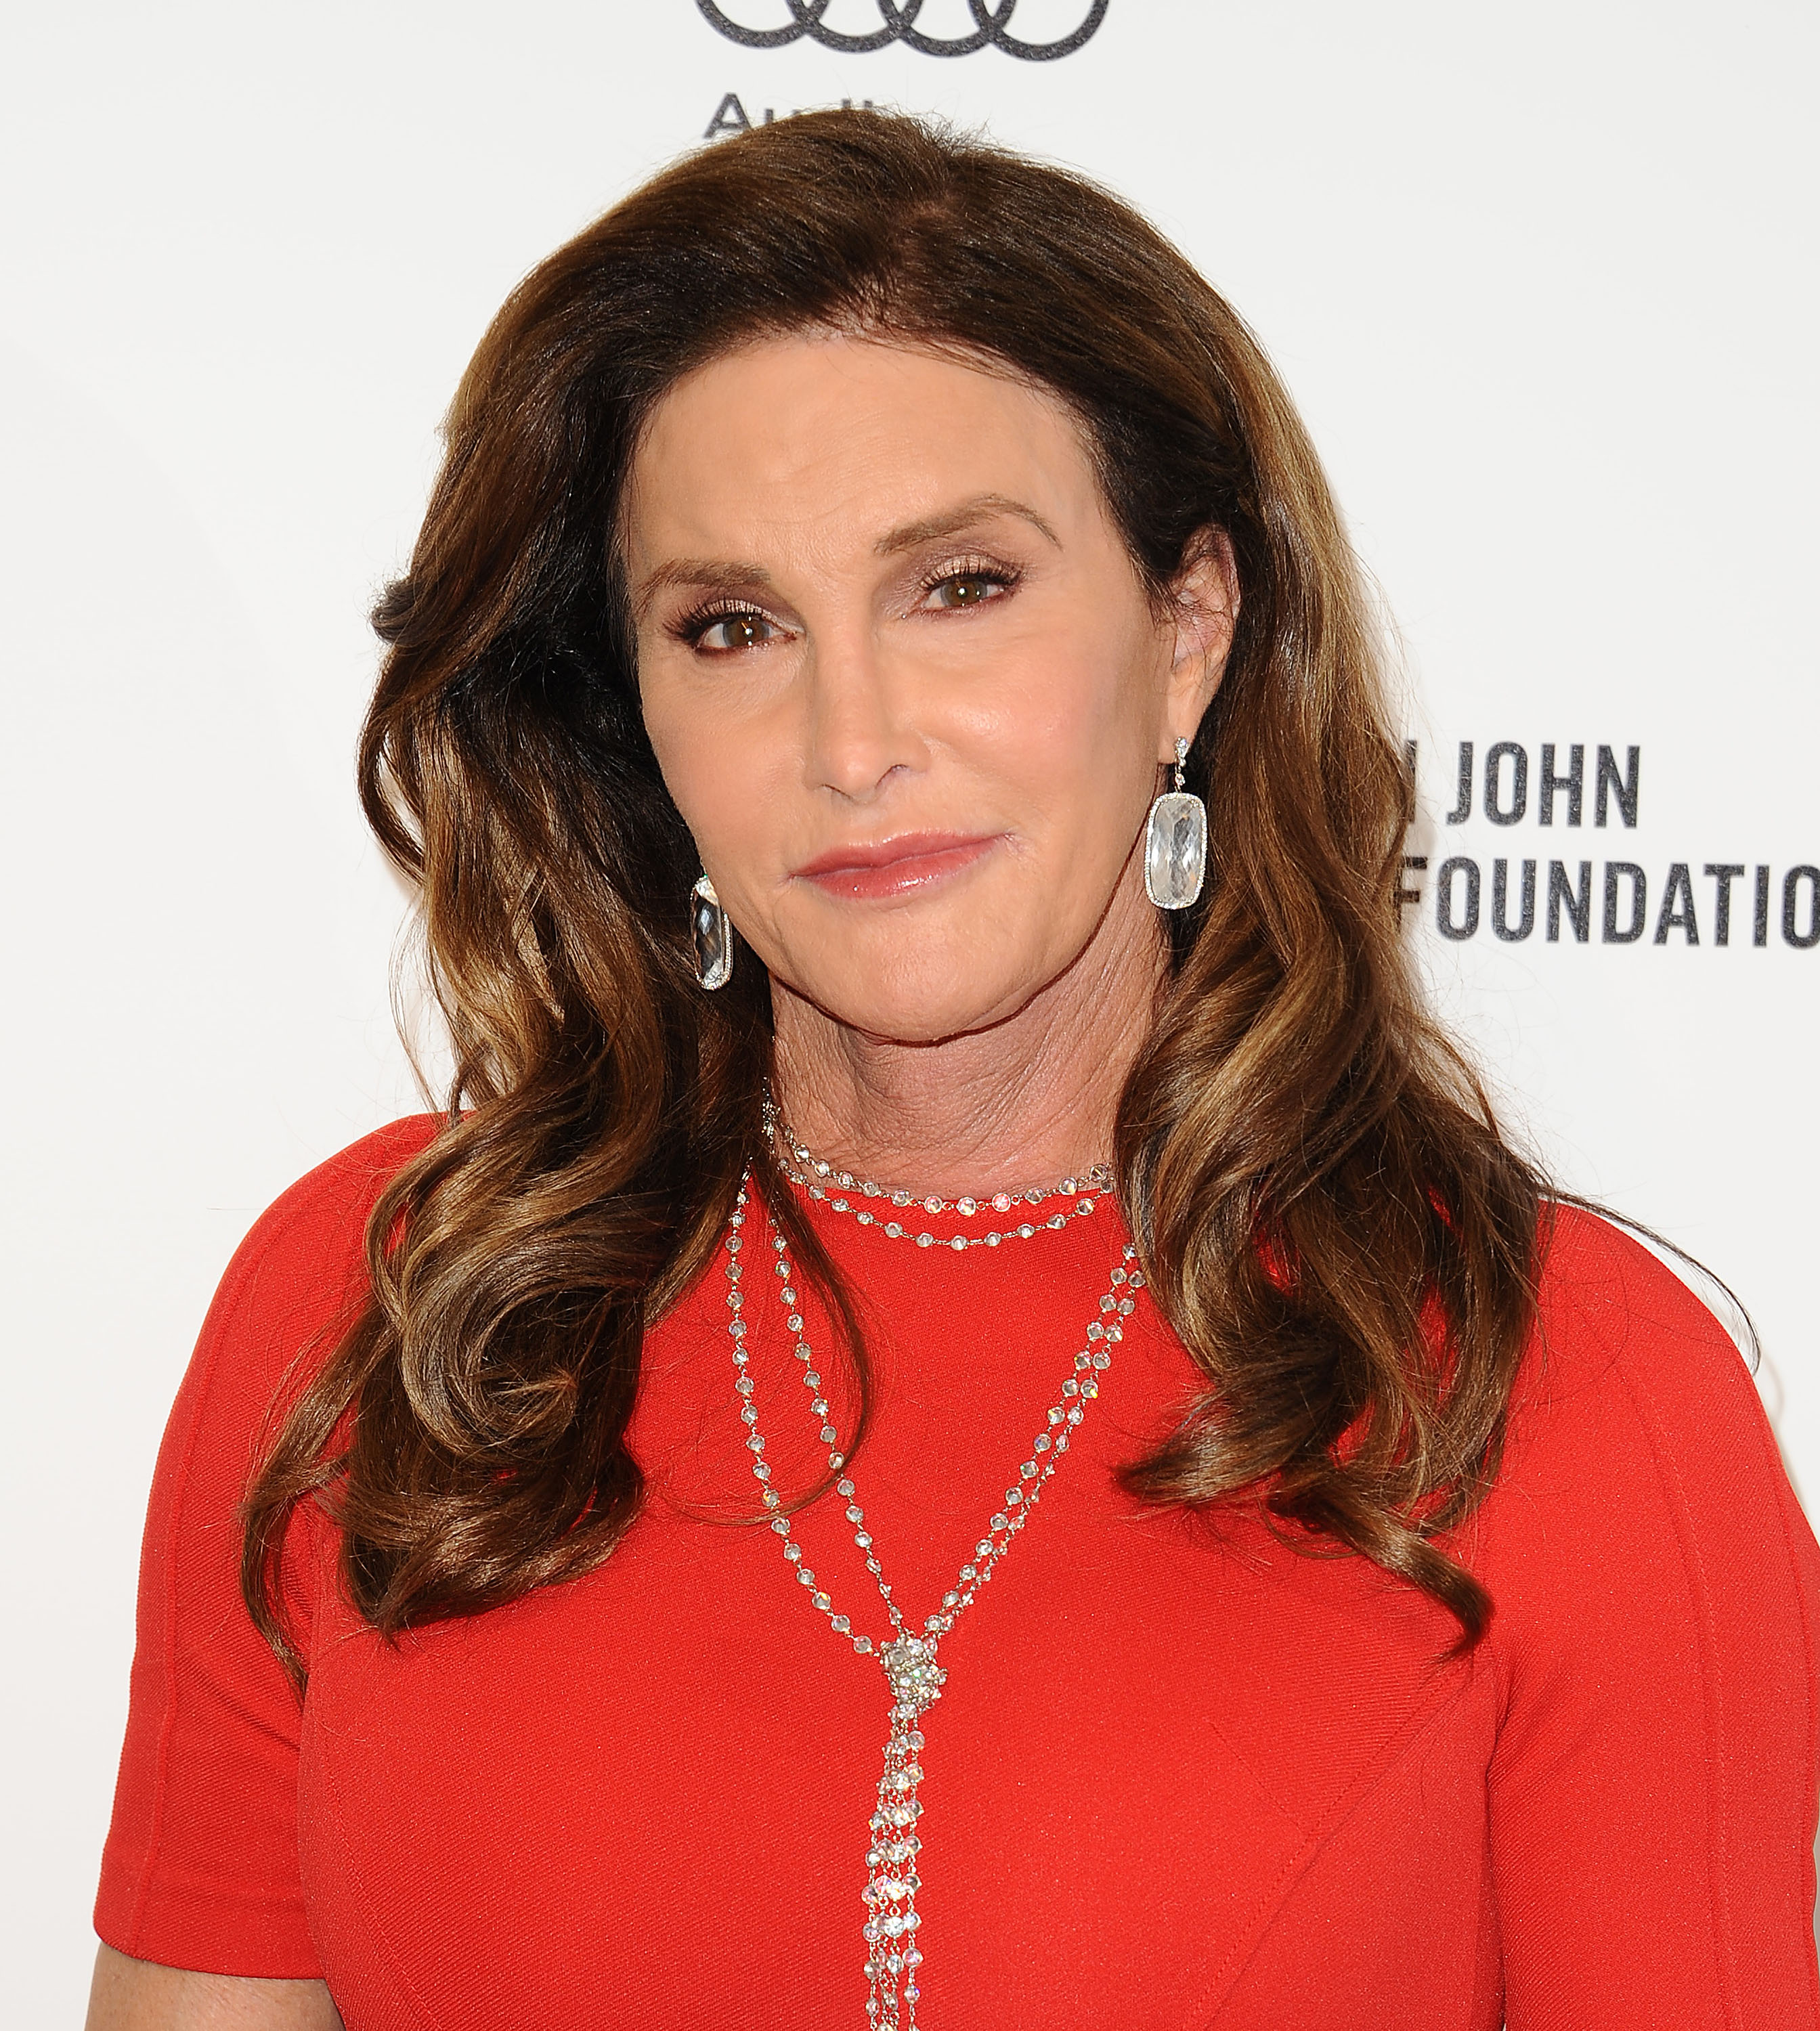 Caitlyn Jenner attends the 24th annual Elton John AIDS Foundation's Oscar viewing party on Feb. 28, 2016 in West Hollywood, California. (Jason LaVeris—Getty Images)